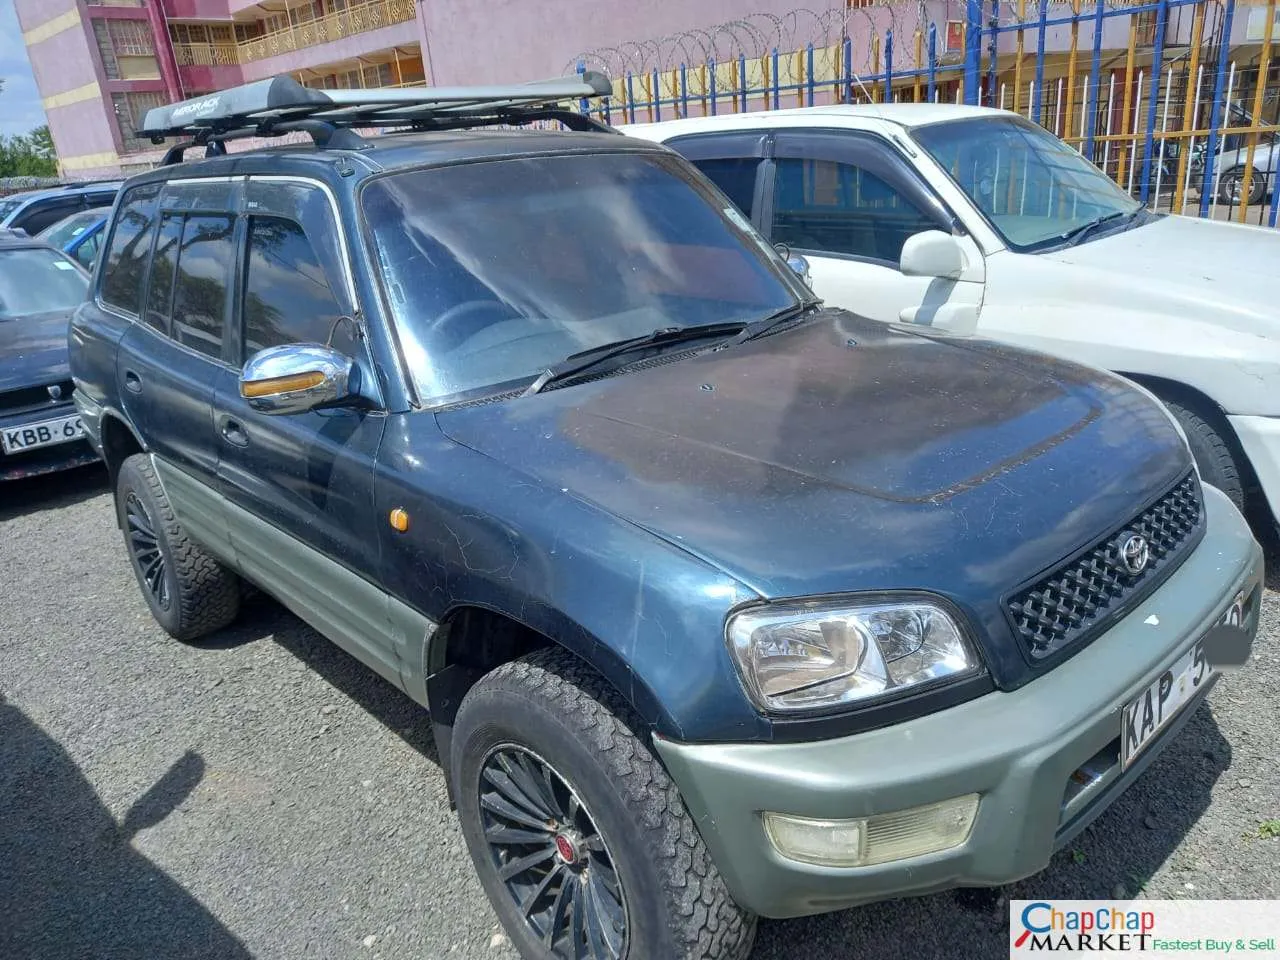 Cars Cars For Sale/Vehicles-Toyota RAV4 for sale in Kenya CHEAPEST You Pay 30% Deposit installments Trade in OK EXCLUSIVE 7